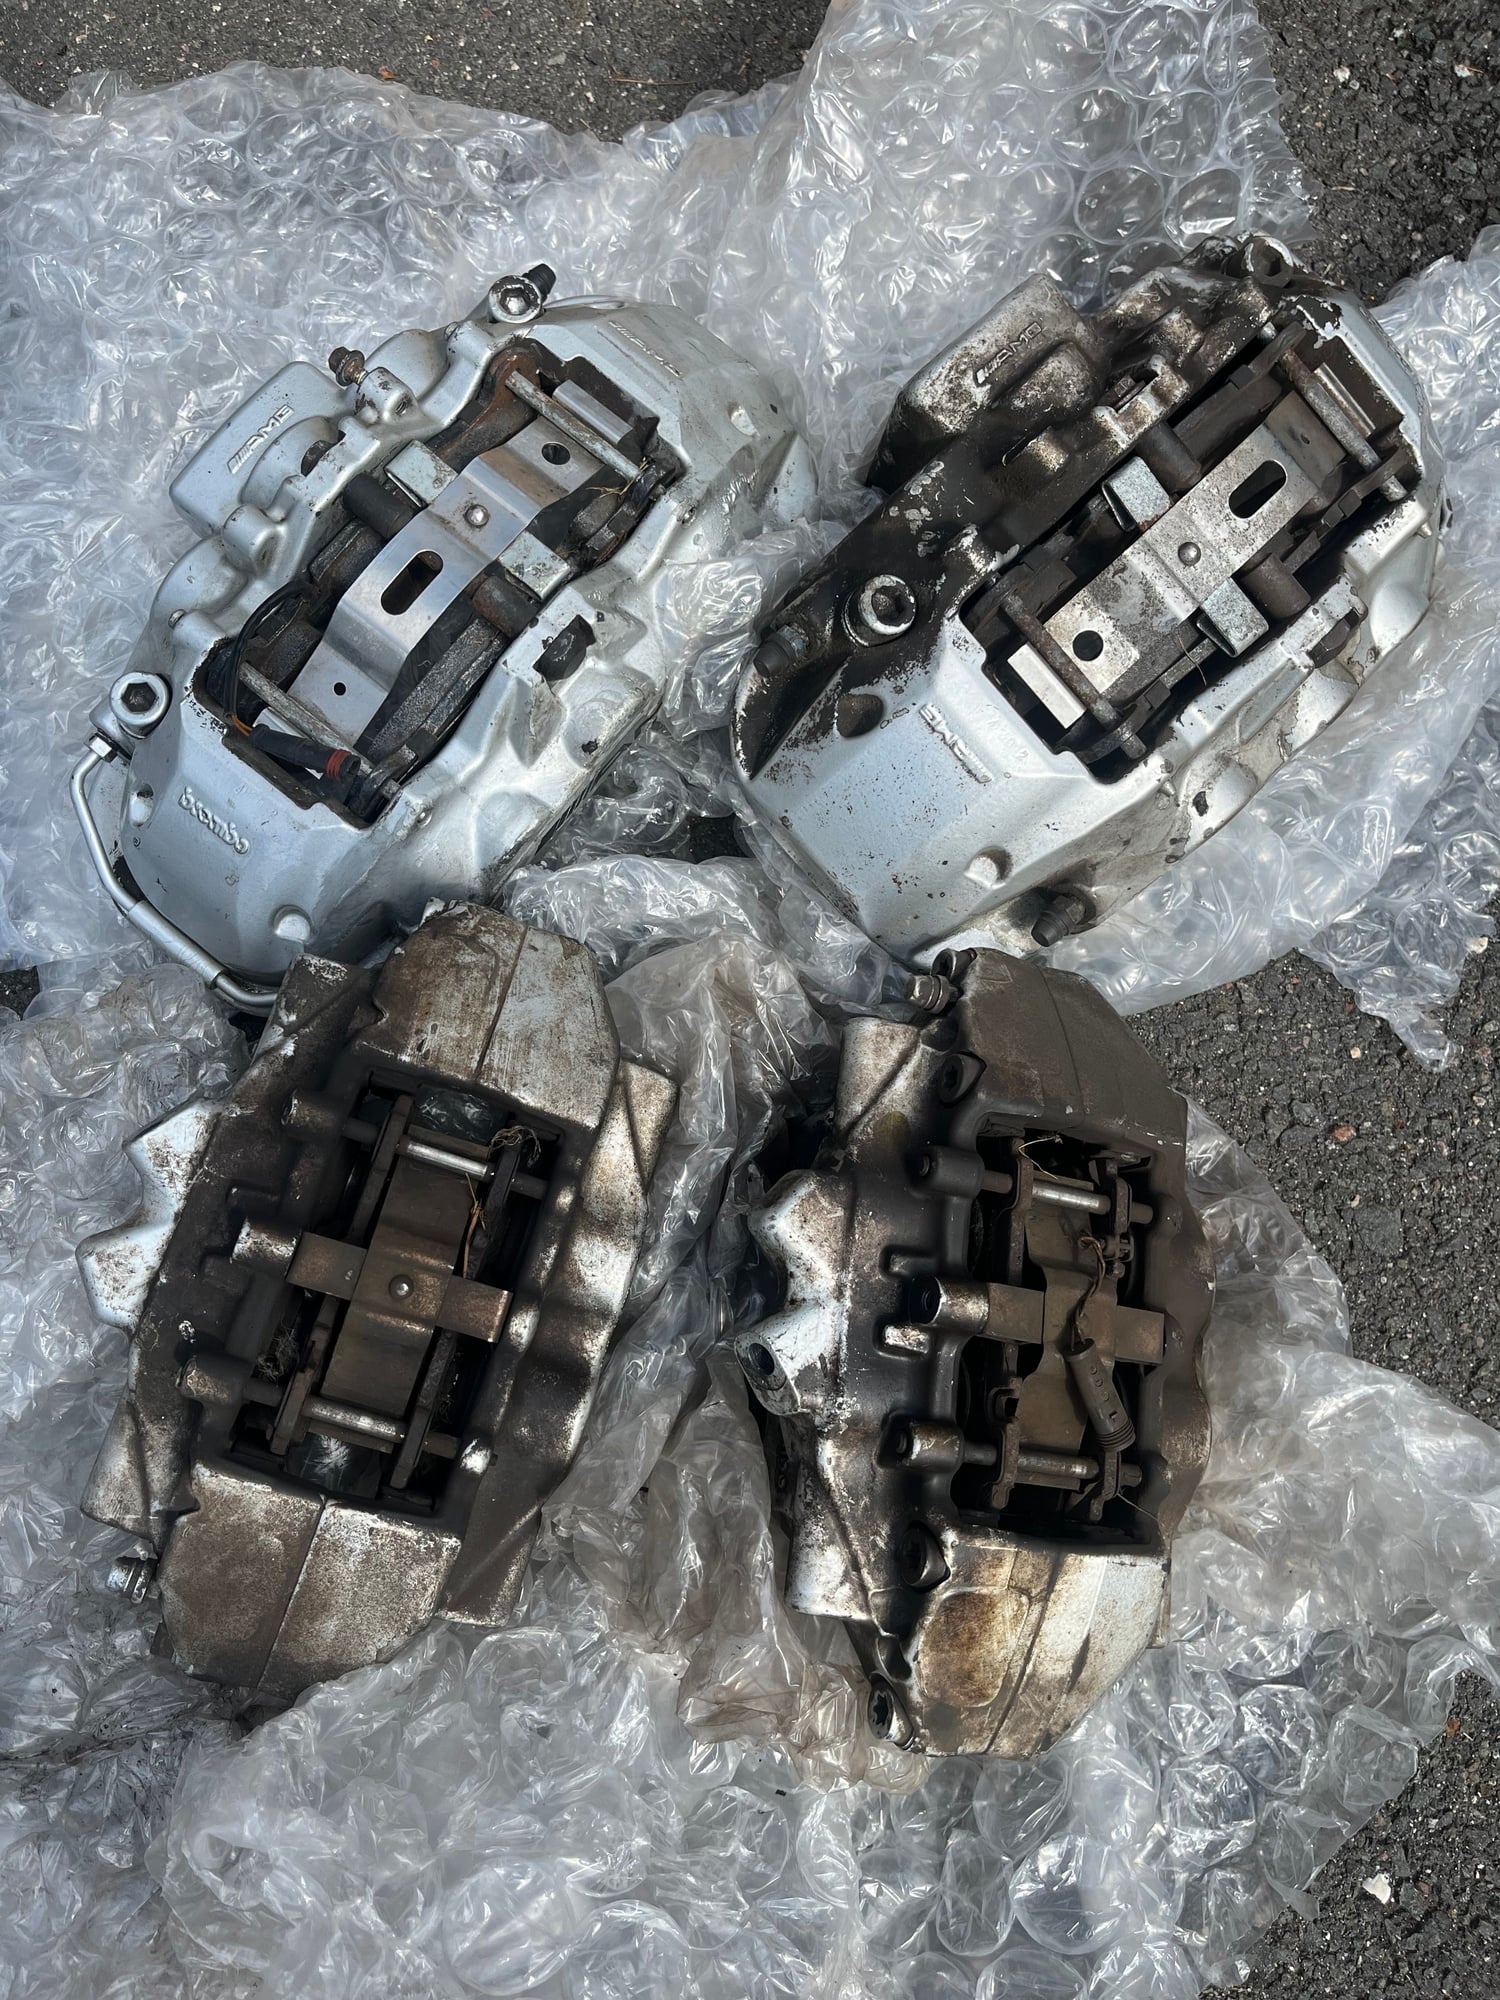 Brakes - Clk55 brake calipers - Used - 0  All Models - West Hartford, CT 06107, United States